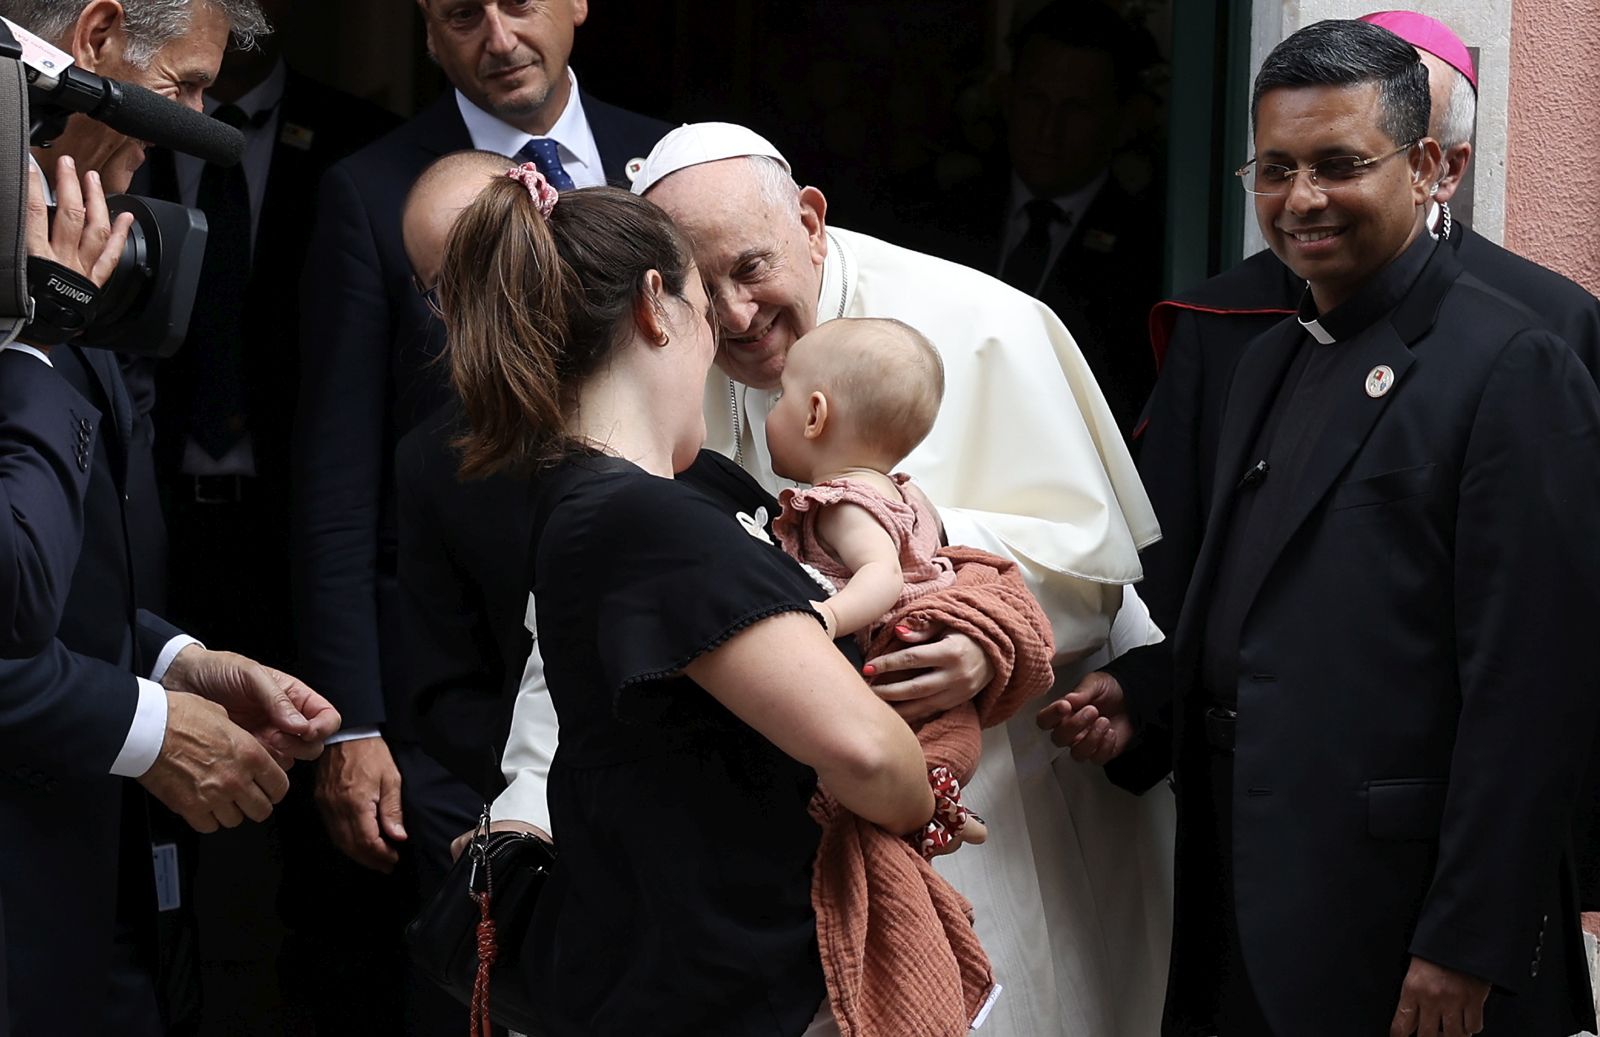 epa10781635 Pope Francis greets a baby after a meeting with the Portugal's Prime Minister at Apostolic Nunciature in Lisbon, Portugal, 02 August 2023. The Pontiff is in Portugal on the occasion of World Youth Day (WYD), one of the main events of the Church that gathers the Pope with youngsters from around the world, that takes place until 06 August.  EPA/MIGUEL A. LOPES / POOL